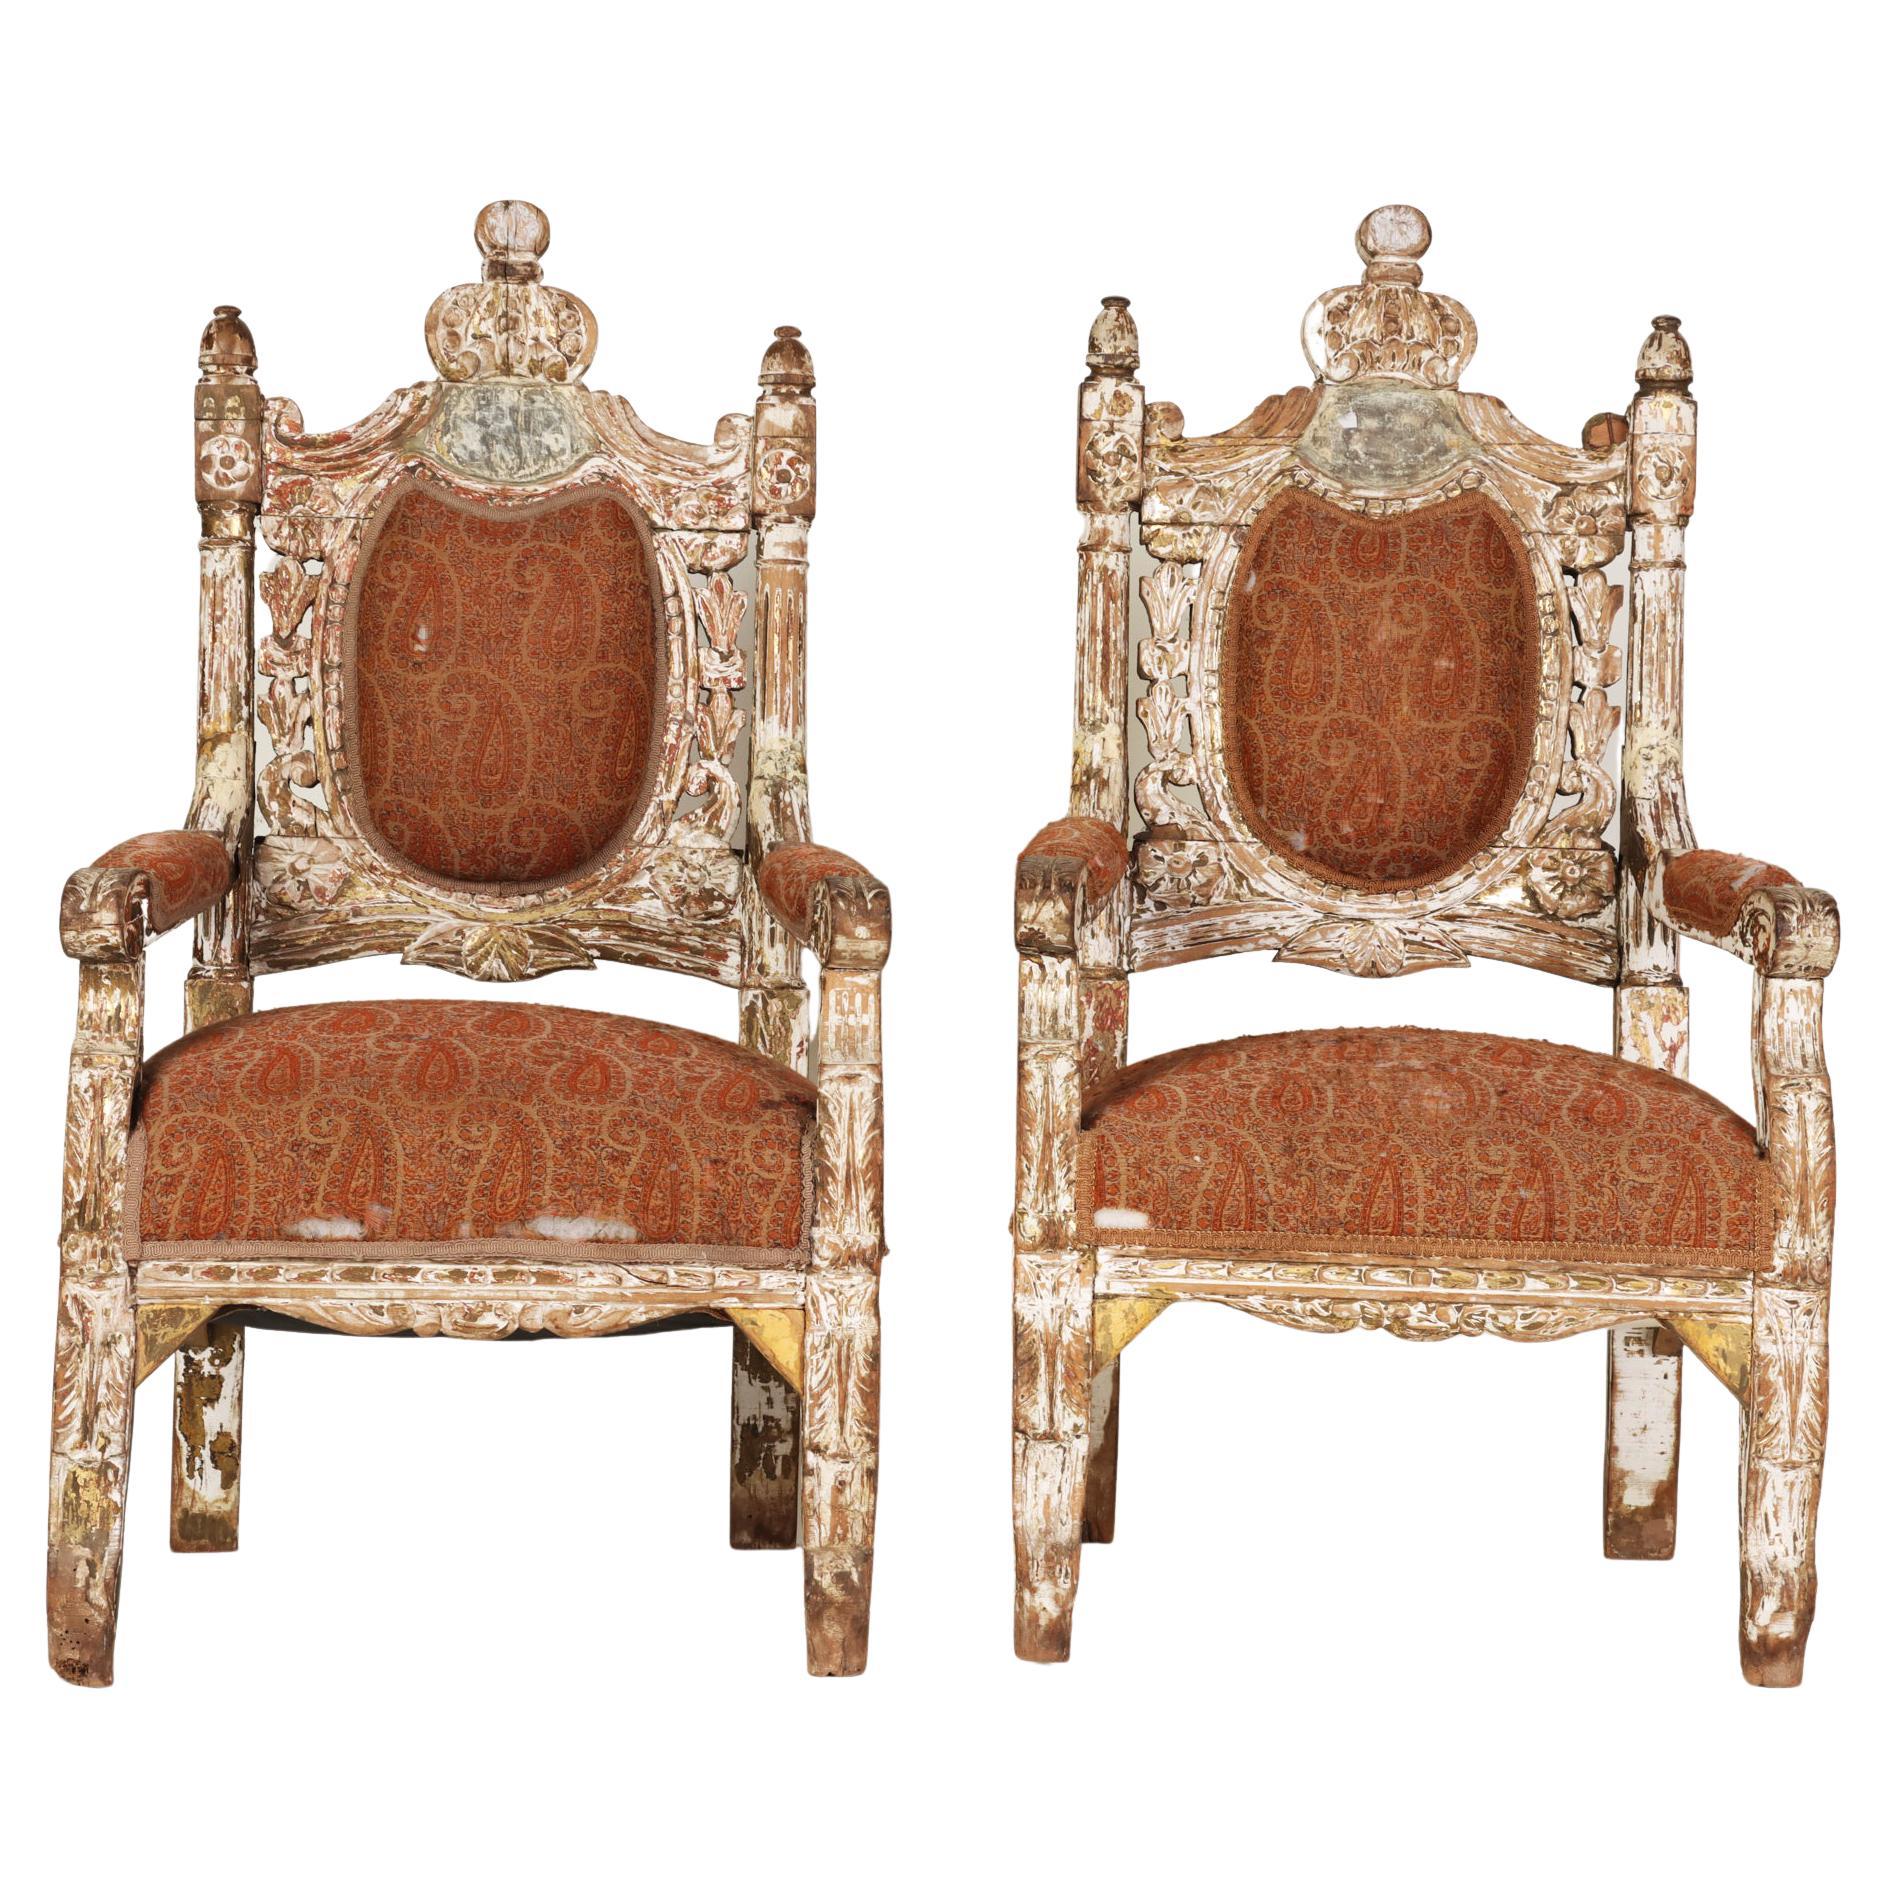 Pair of Monumental Italian Throne Style Carved Armchairs, Early 19th C For Sale